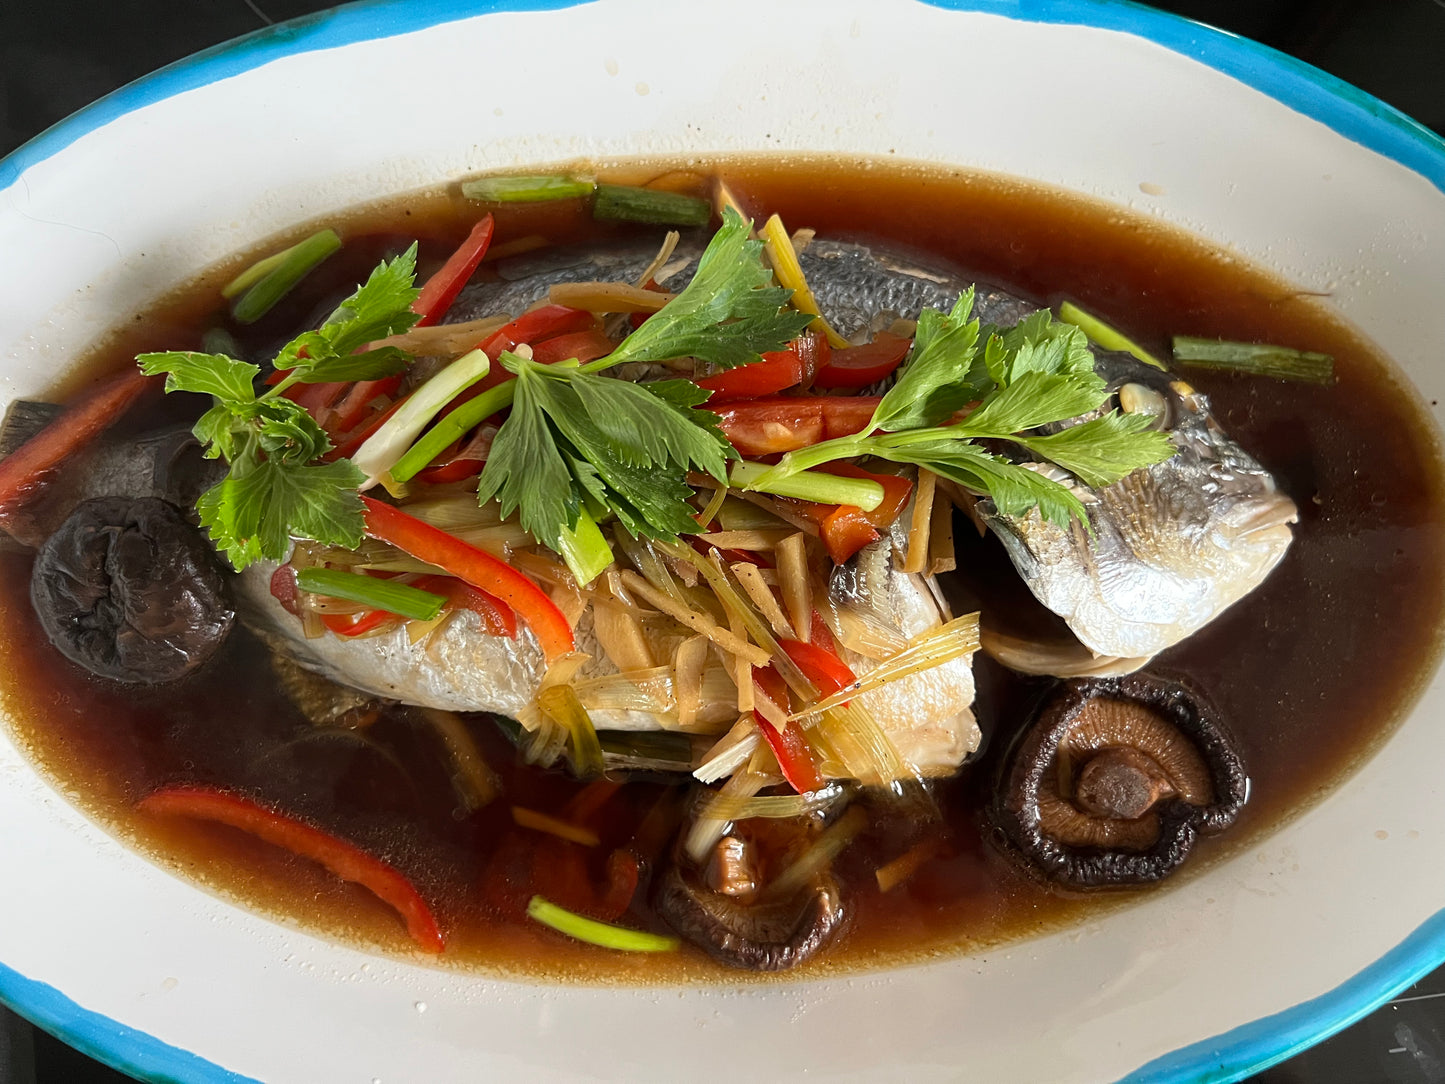 Pla neung sea iew - Steamed fish with soy sauce (2 persons)